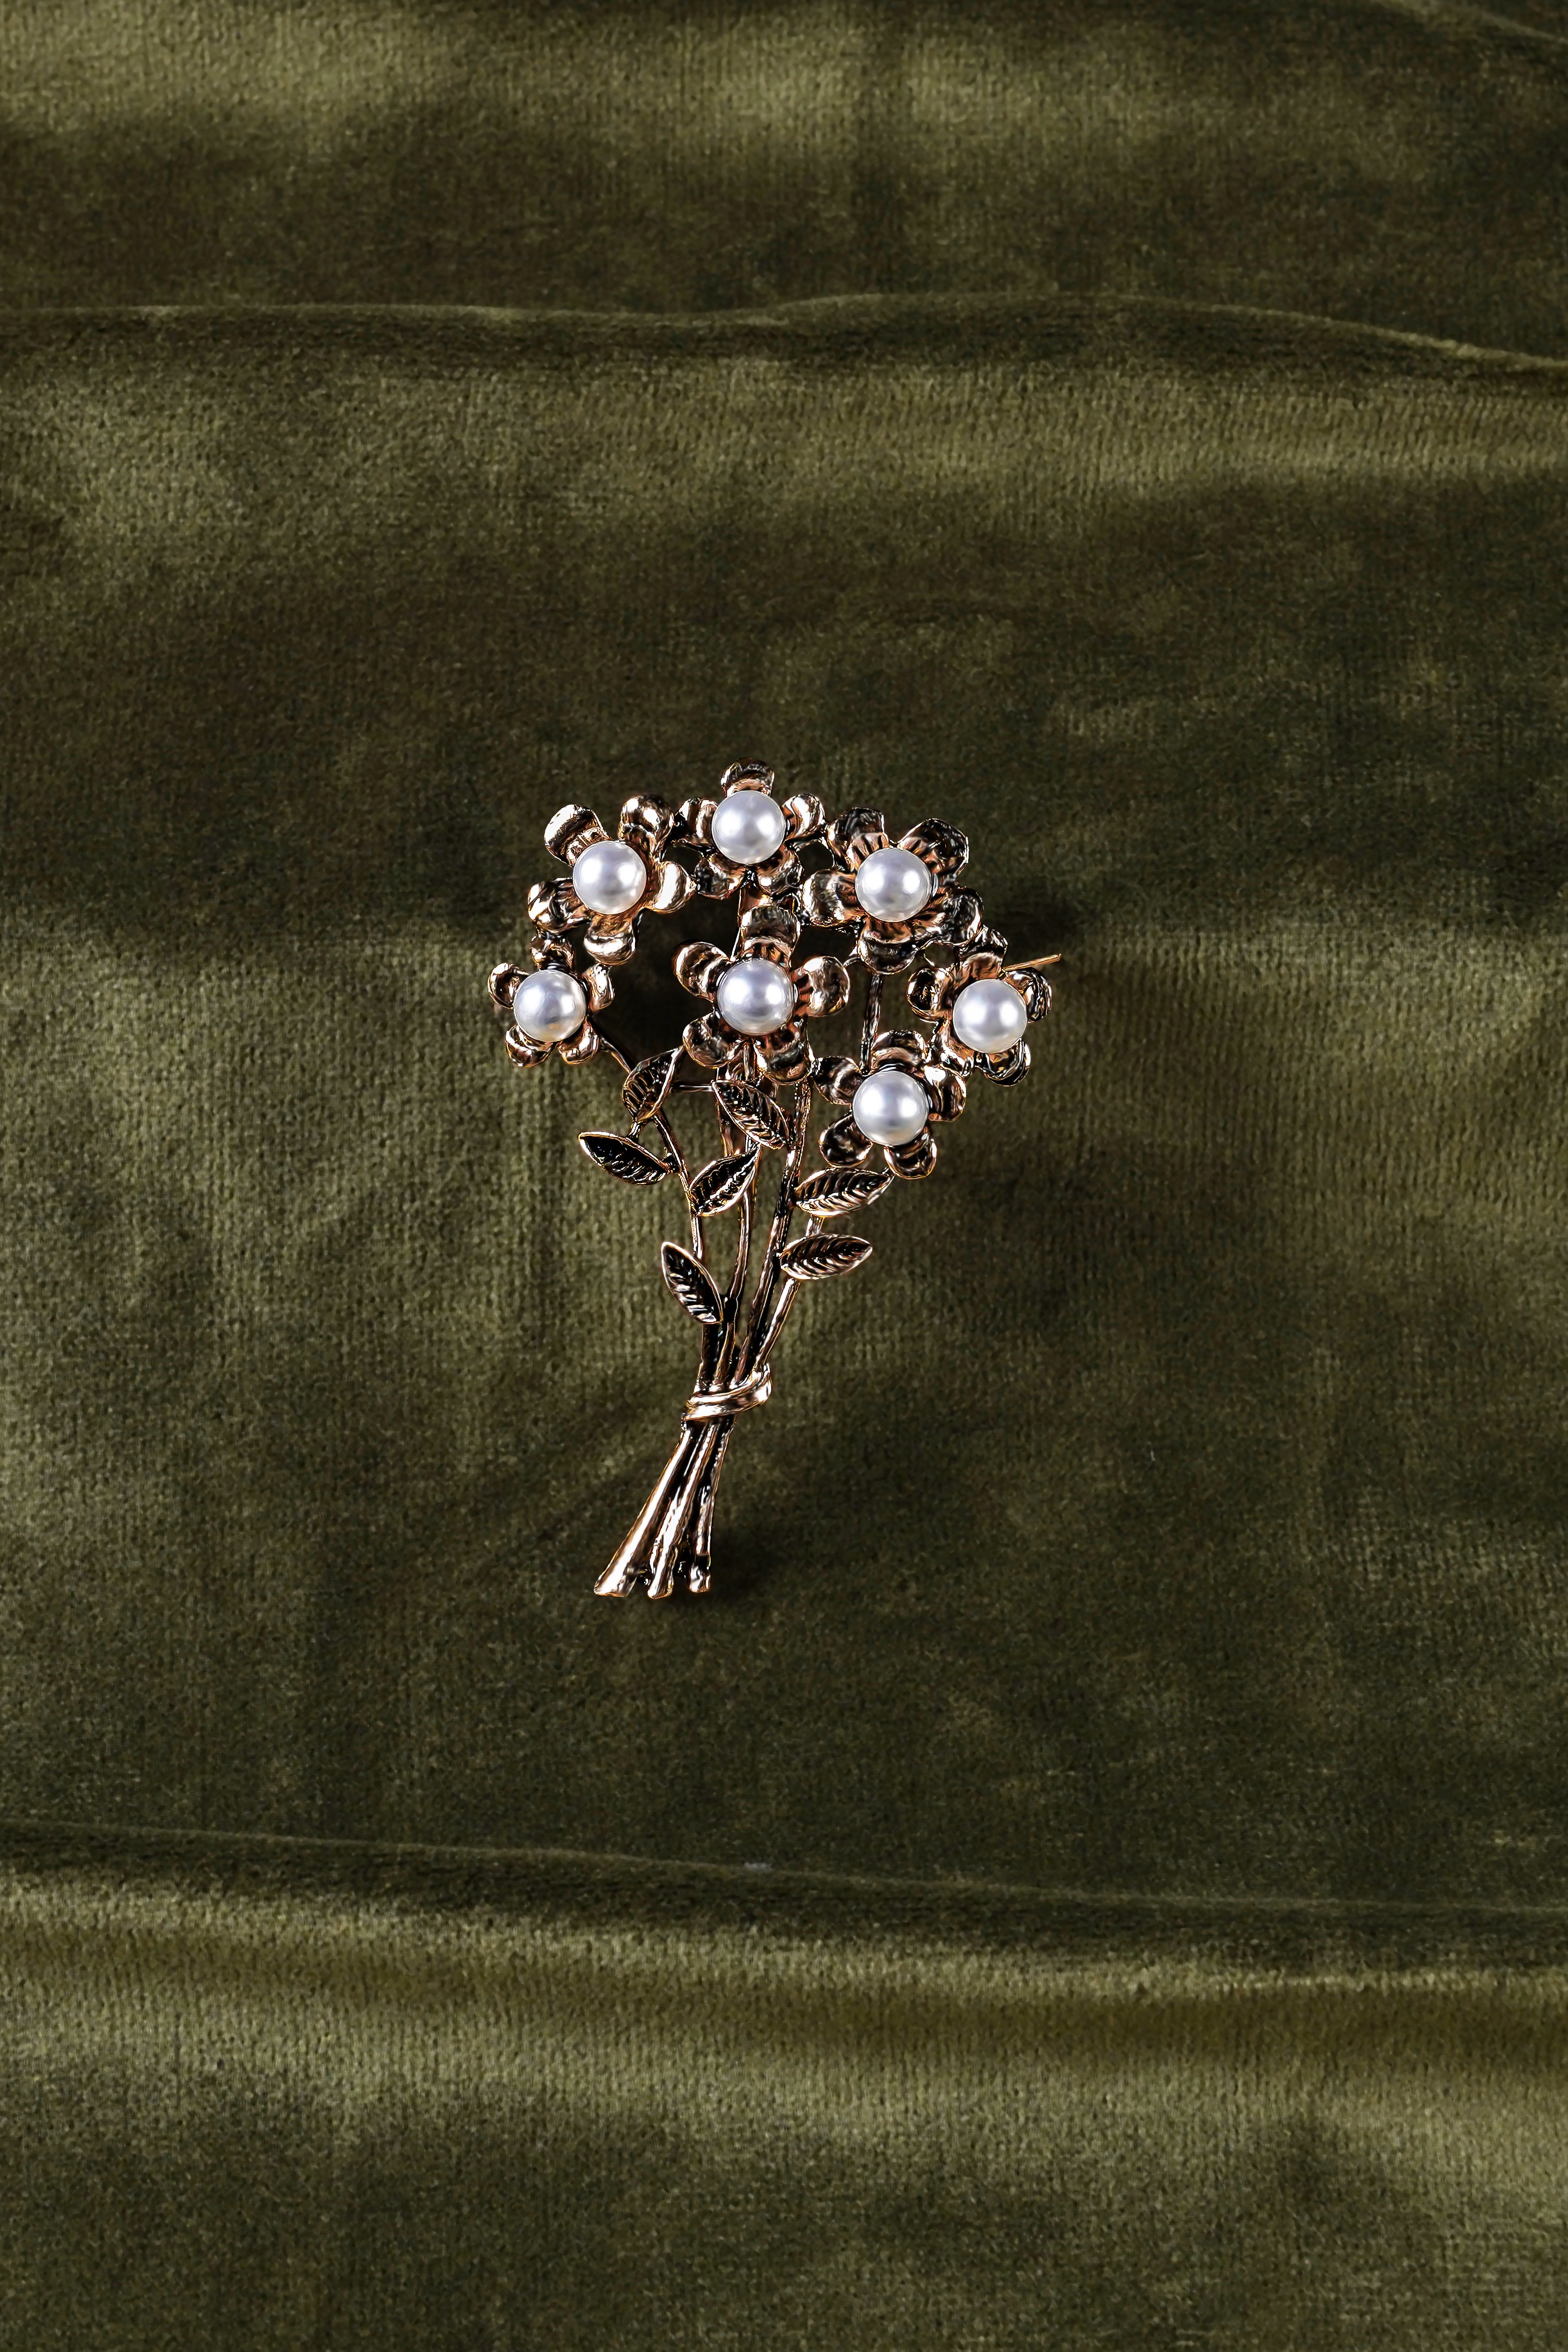 Vintage Flower Shaped Gold Tone and Faux Pearl Brooch